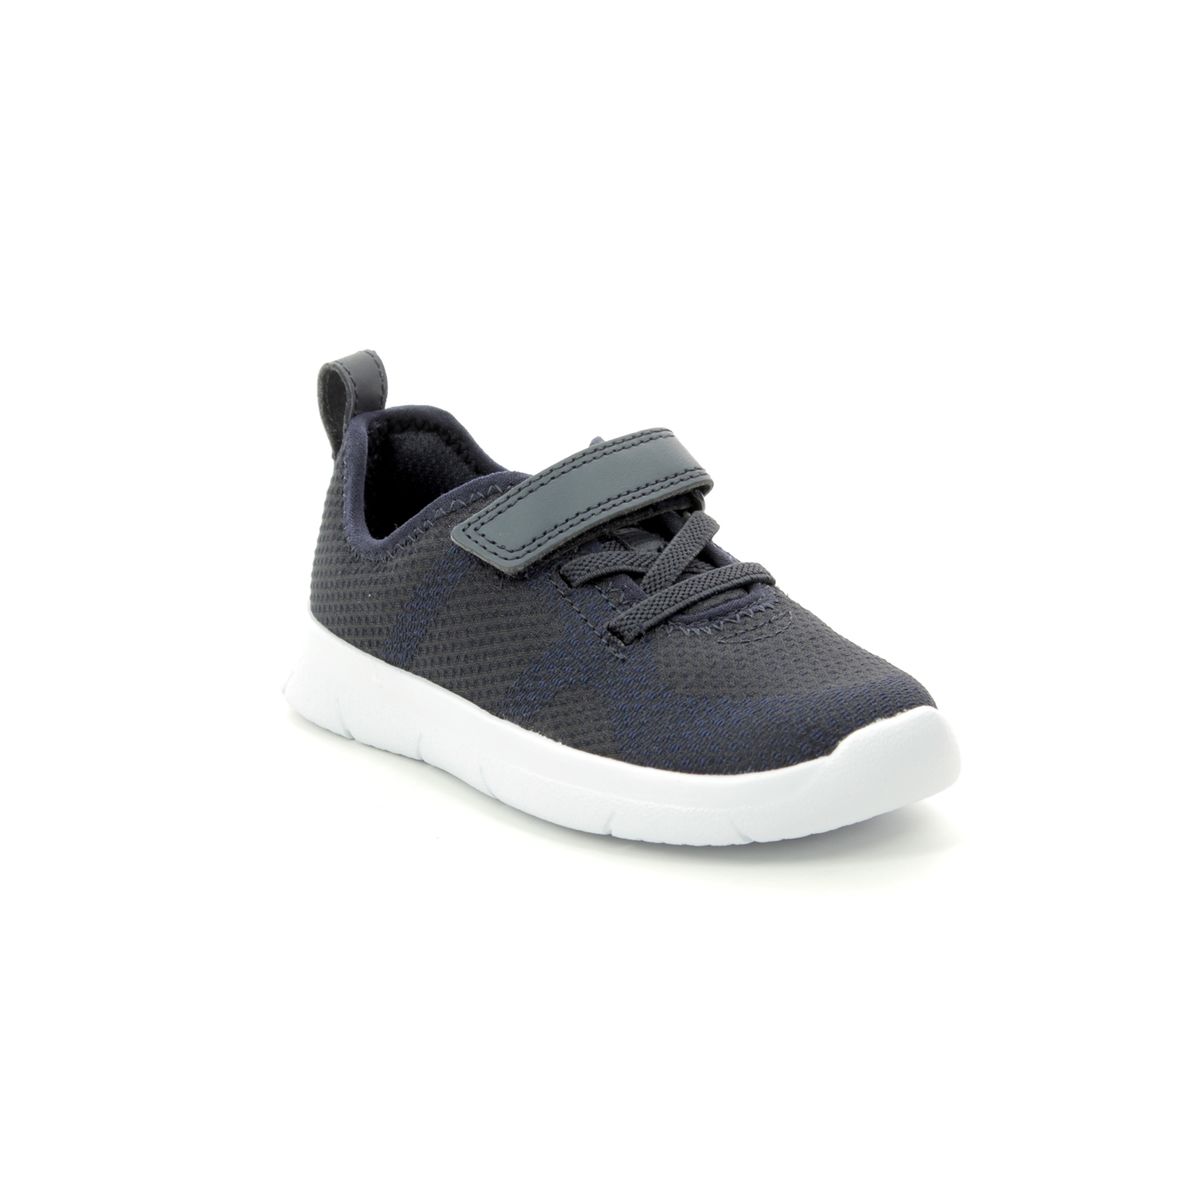 Clarks Ath Flux T Navy Kids Toddler Boys Trainers 412696F In Size 8.5 In Plain Navy F Width Fitting Regular Fit For kids